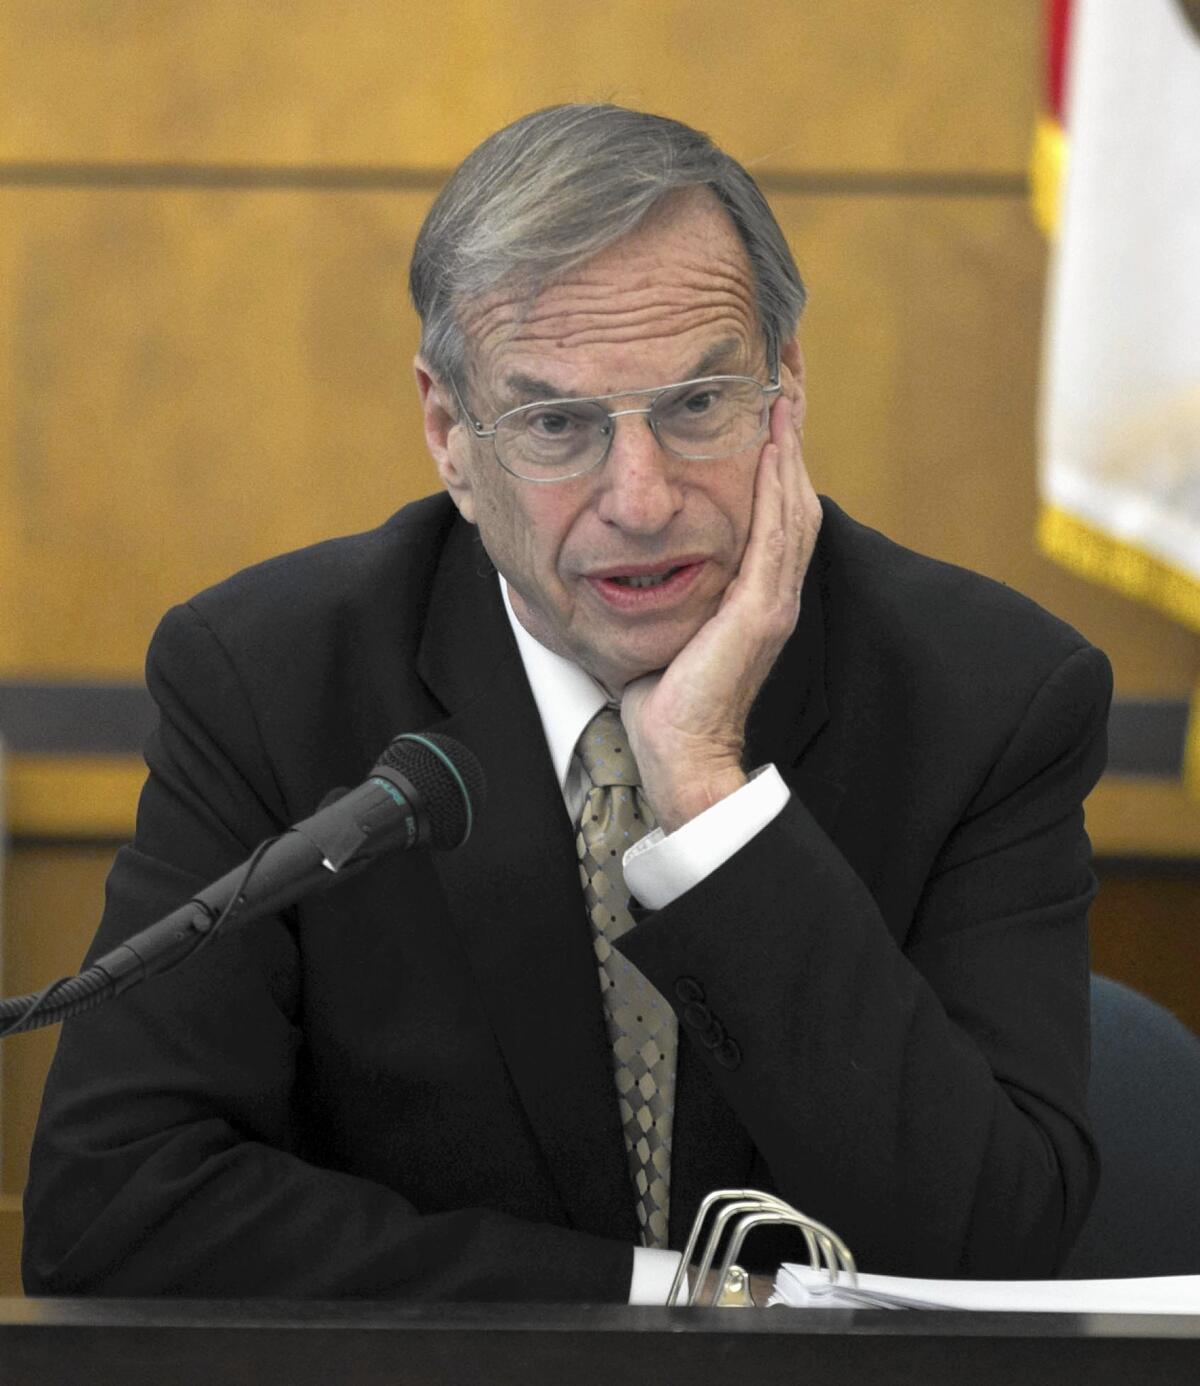 A San Diego jury said that former Mayor Bob Filner had harassed a longtime city parks employee because of her gender, but found the harassment was neither serious nor pervasive.